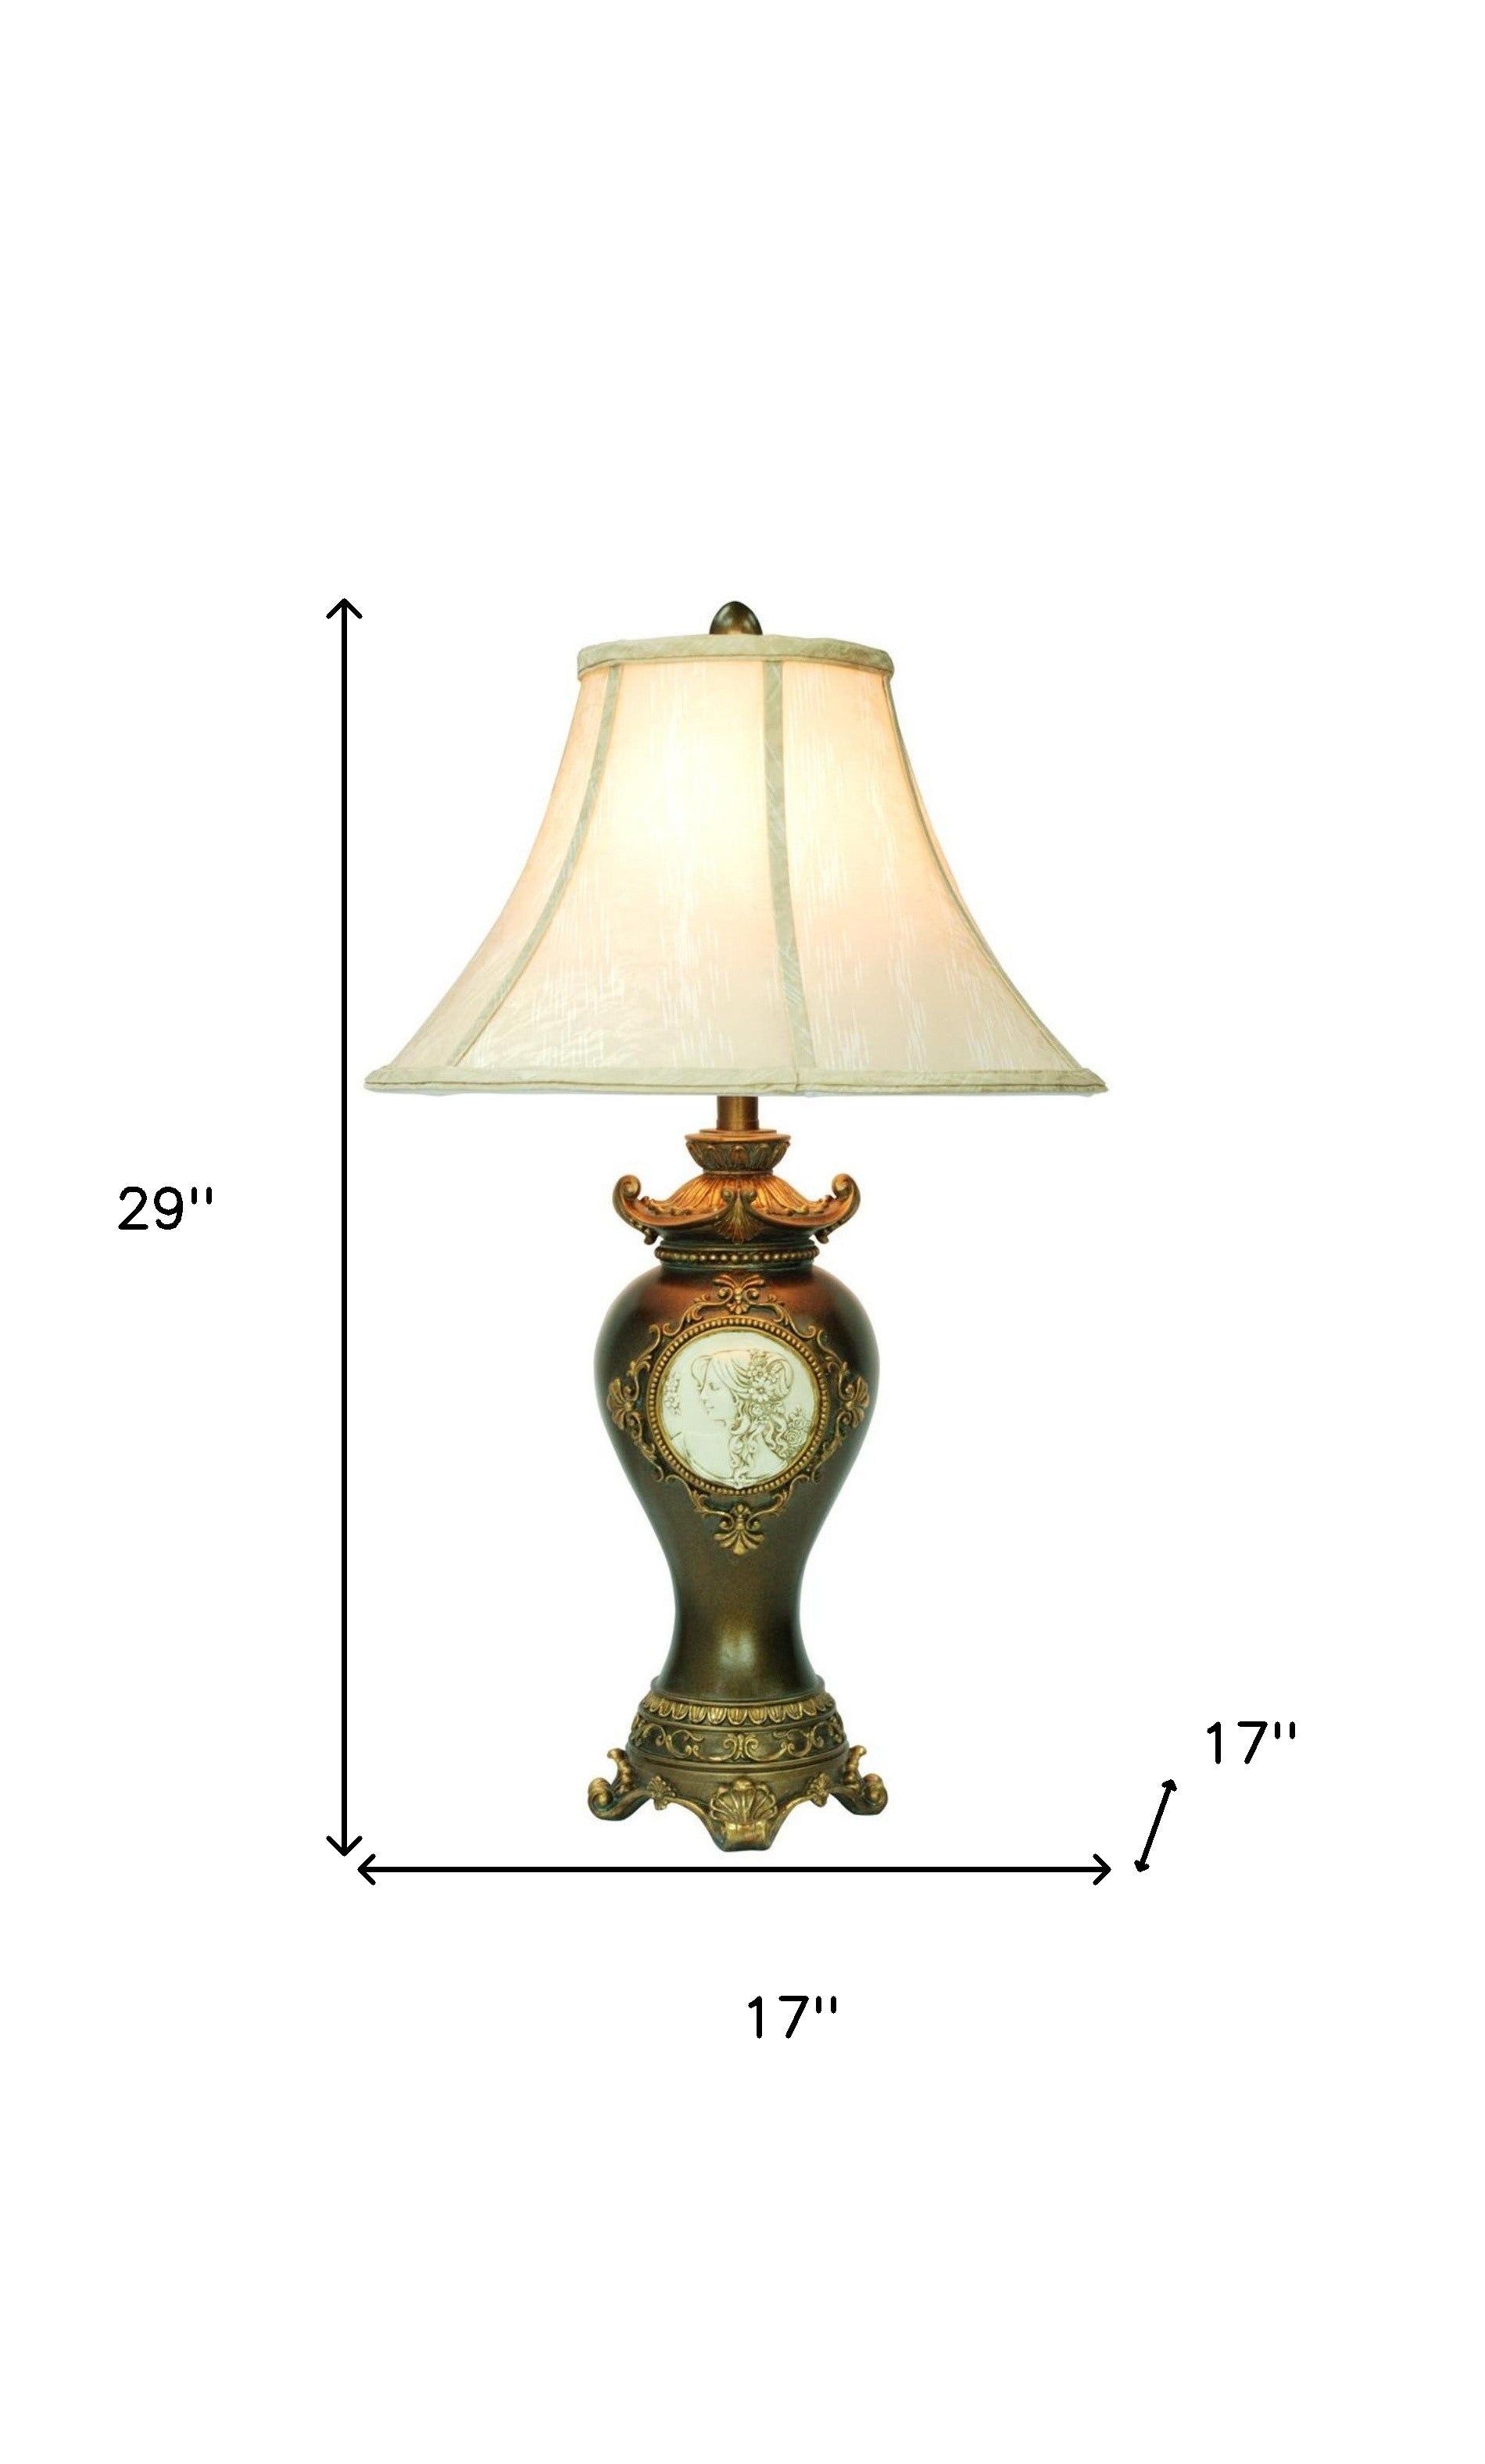 29" Brown Metal Bedside Table Lamp With Off-White Shade